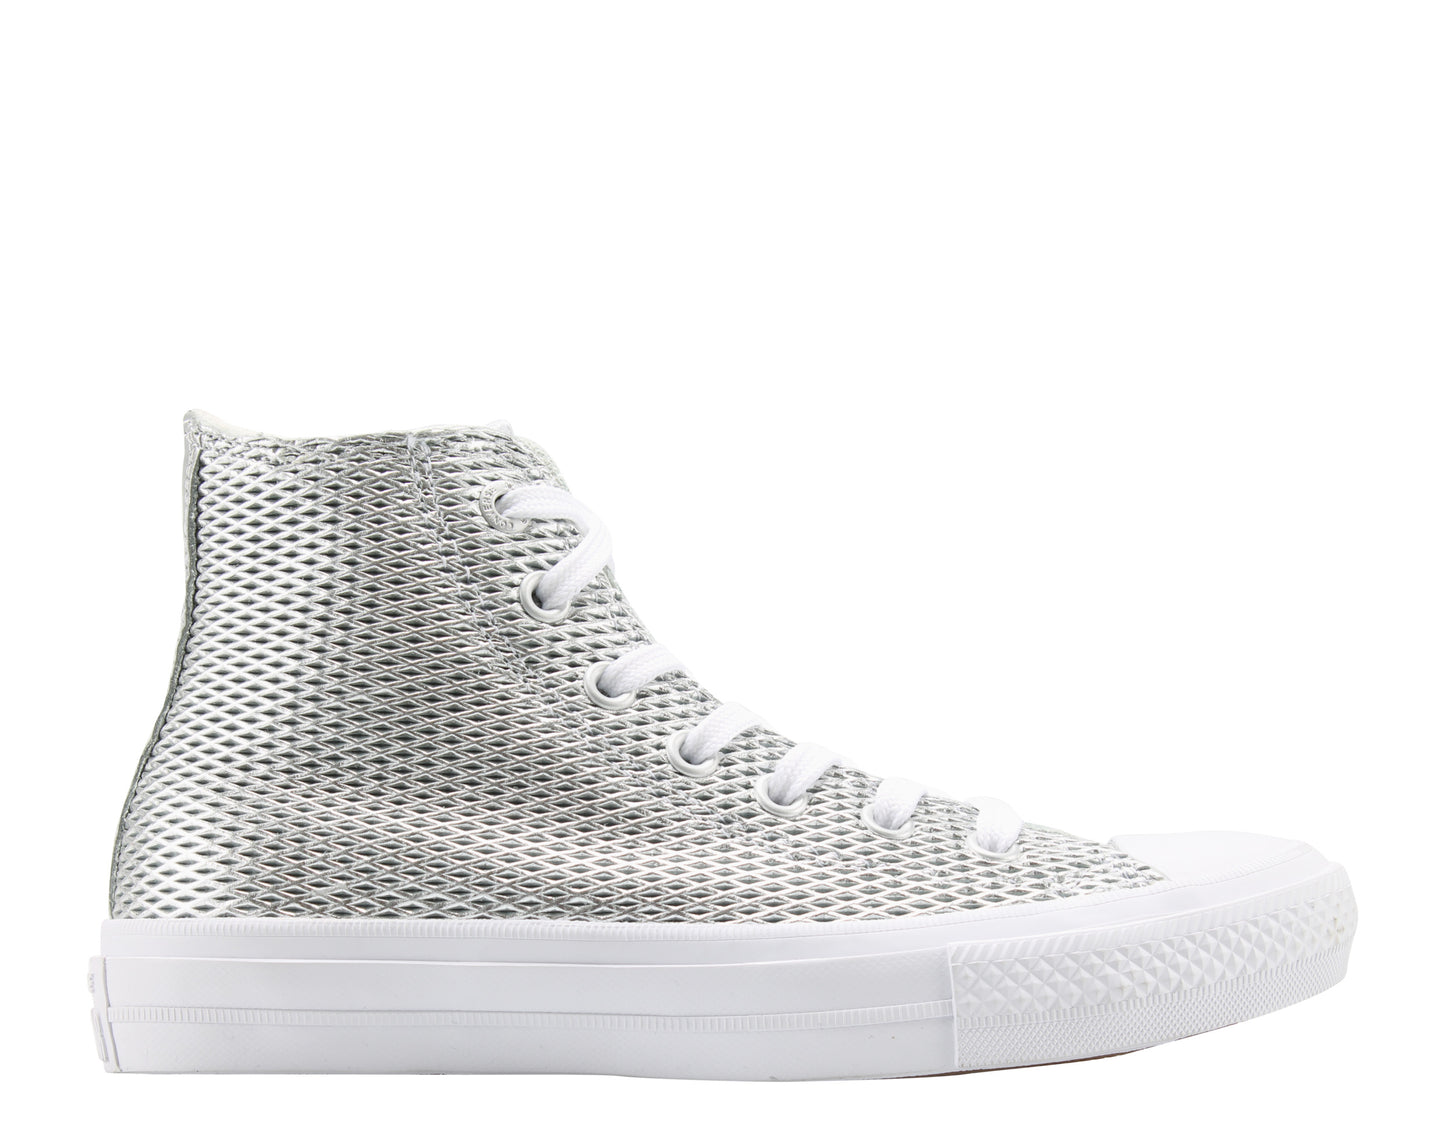 Converse Chuck Taylor All Star II High top Women's Sneakers